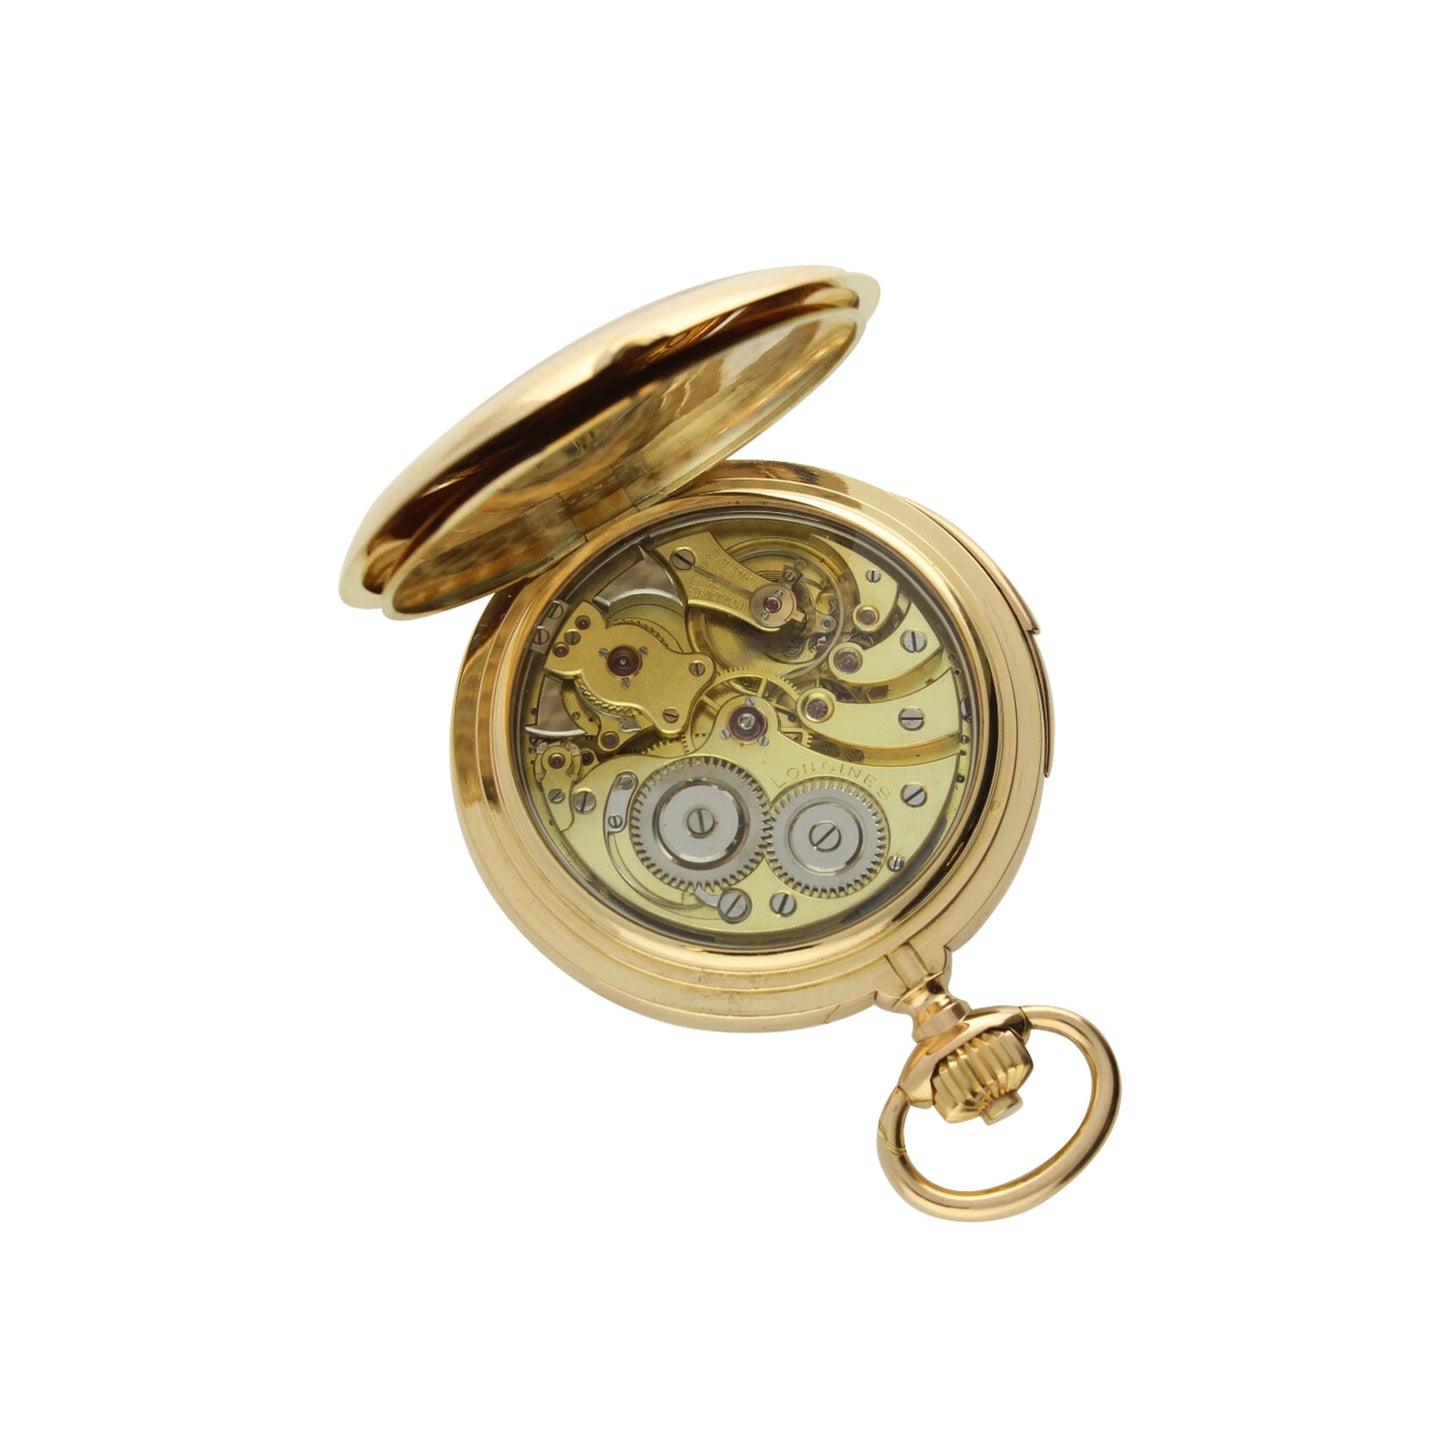 18ct rose gold minute repeater pocket watch. Made 1908